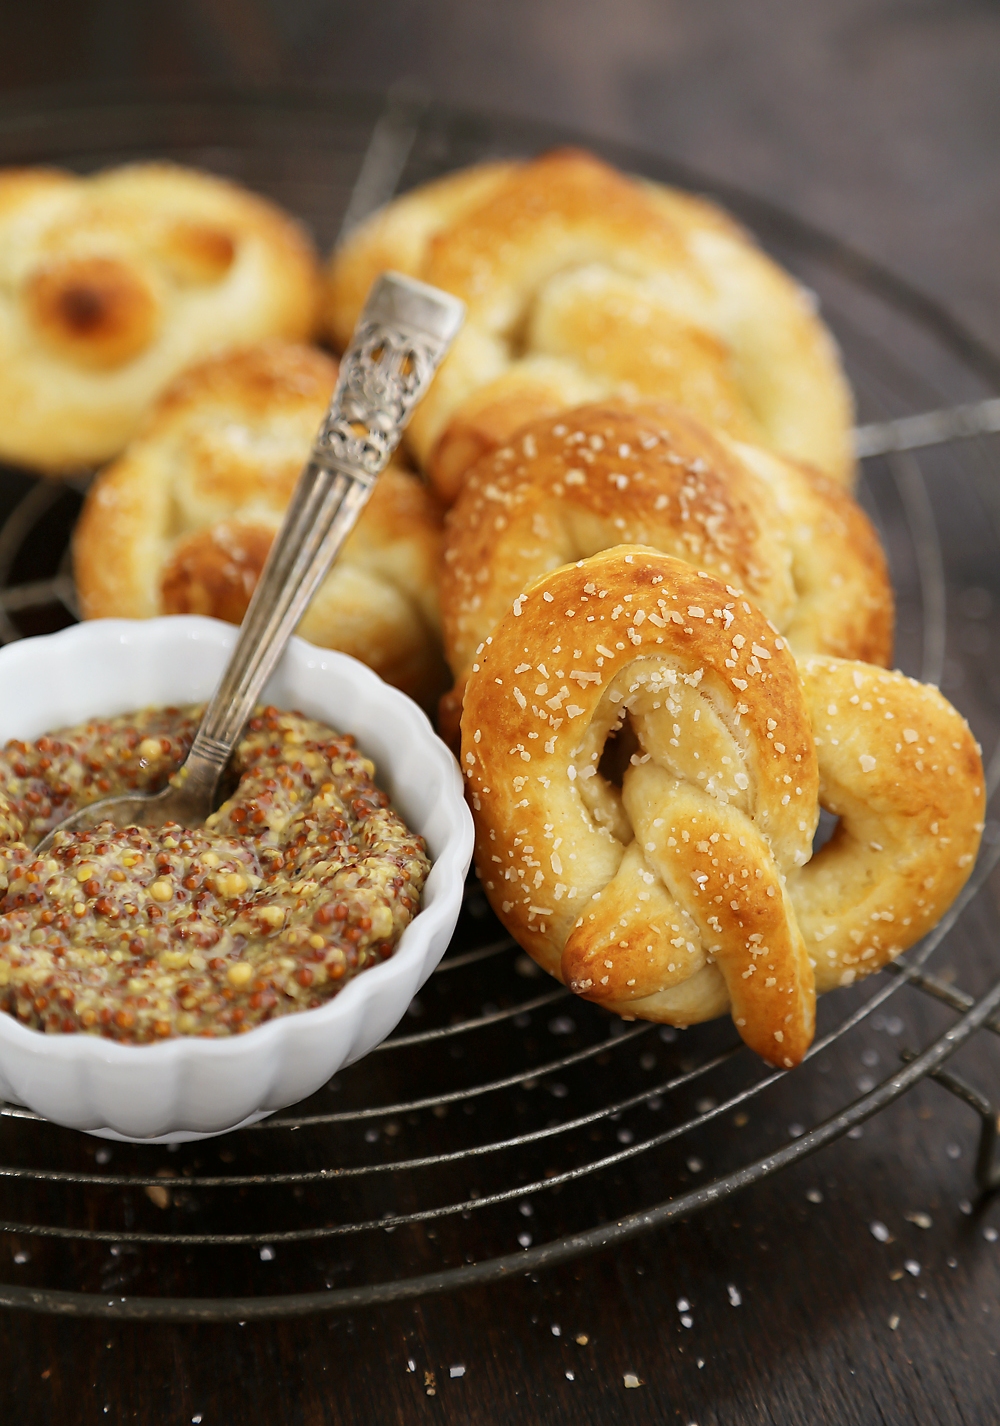 Easy Mini Soft Pretzels + Cheese Sauce – Fluffy, salty pretzels made quick + easy with pizza dough! Serve with spicy mustard or a homemade cheese sauce (recipe included). thecomfortofcooking.com